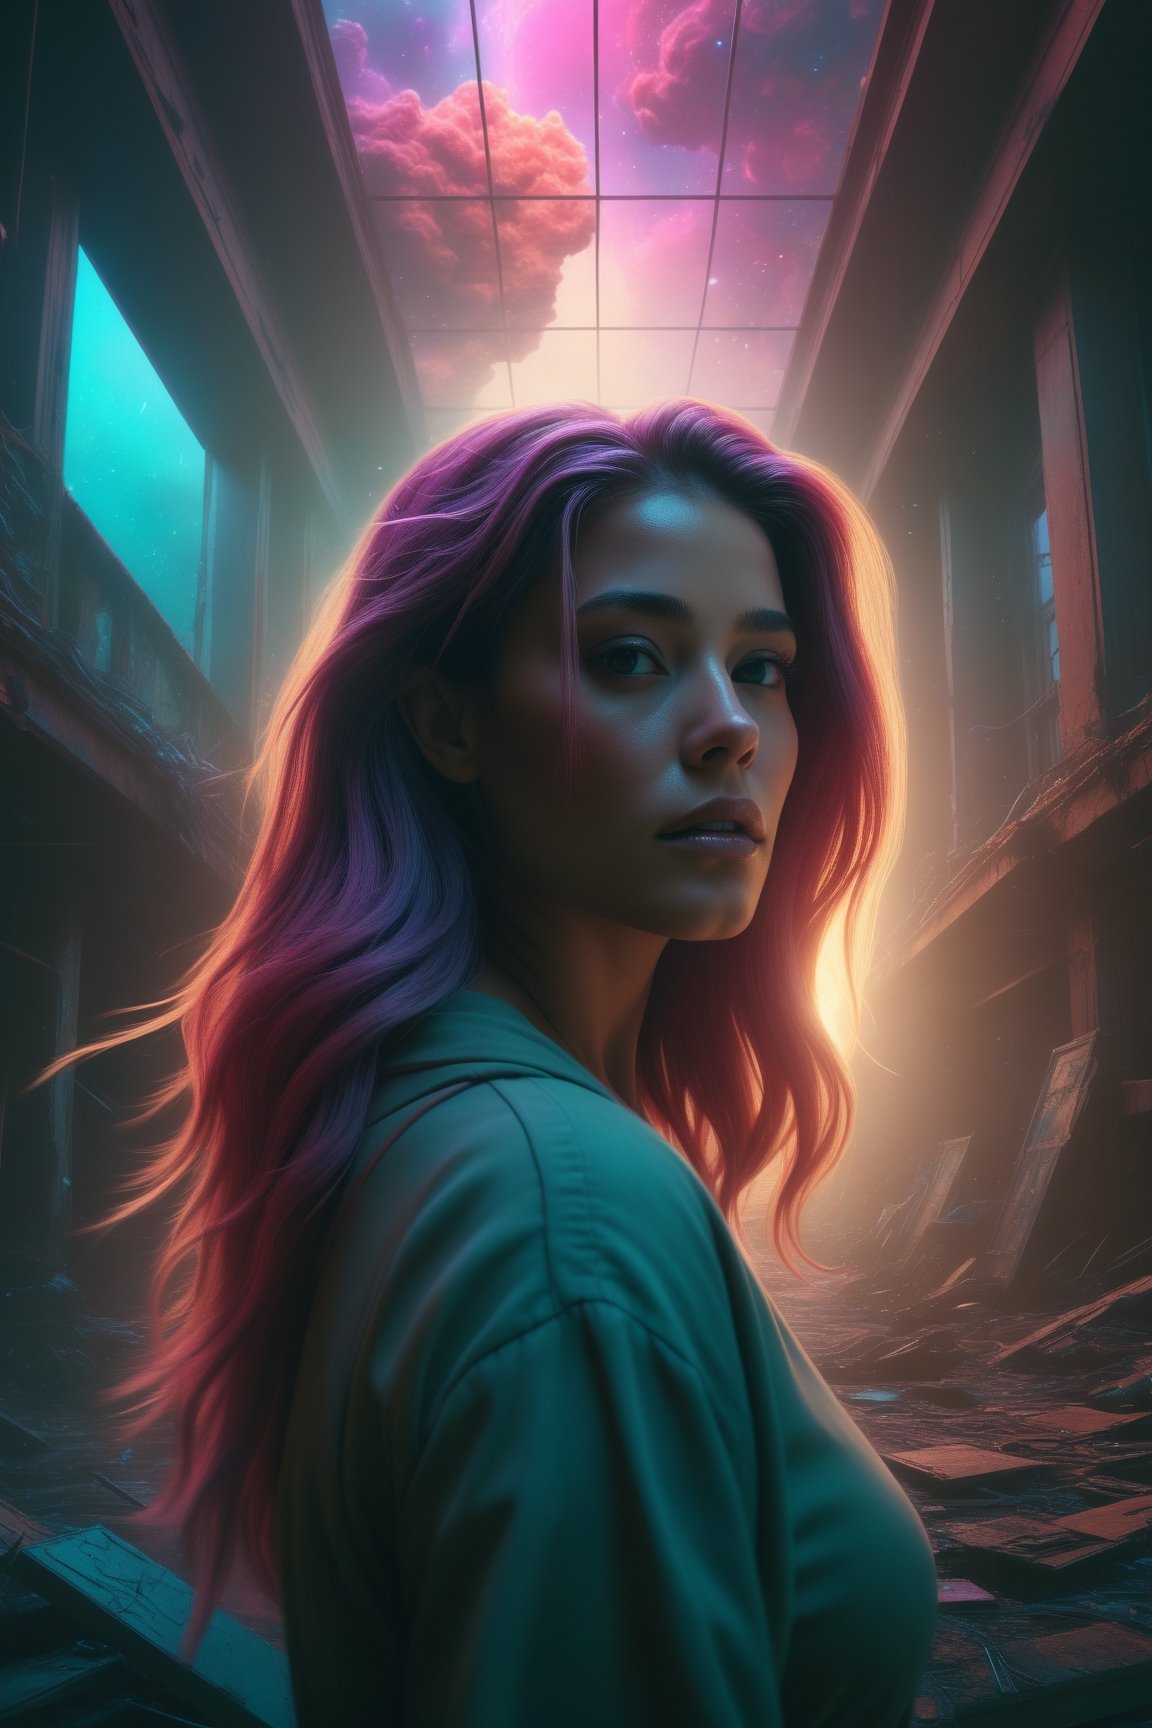 Artwork inspired by Mike Winkelmann (Beeple), Poster layout, Featuring a close-up of a woman with long hair in a hauntingly gorgeous abandoned space. Blend Beeple's signature style with colorful digital effects and an ethereal atmosphere to create a striking piece that captures the essence of beauty within decay.